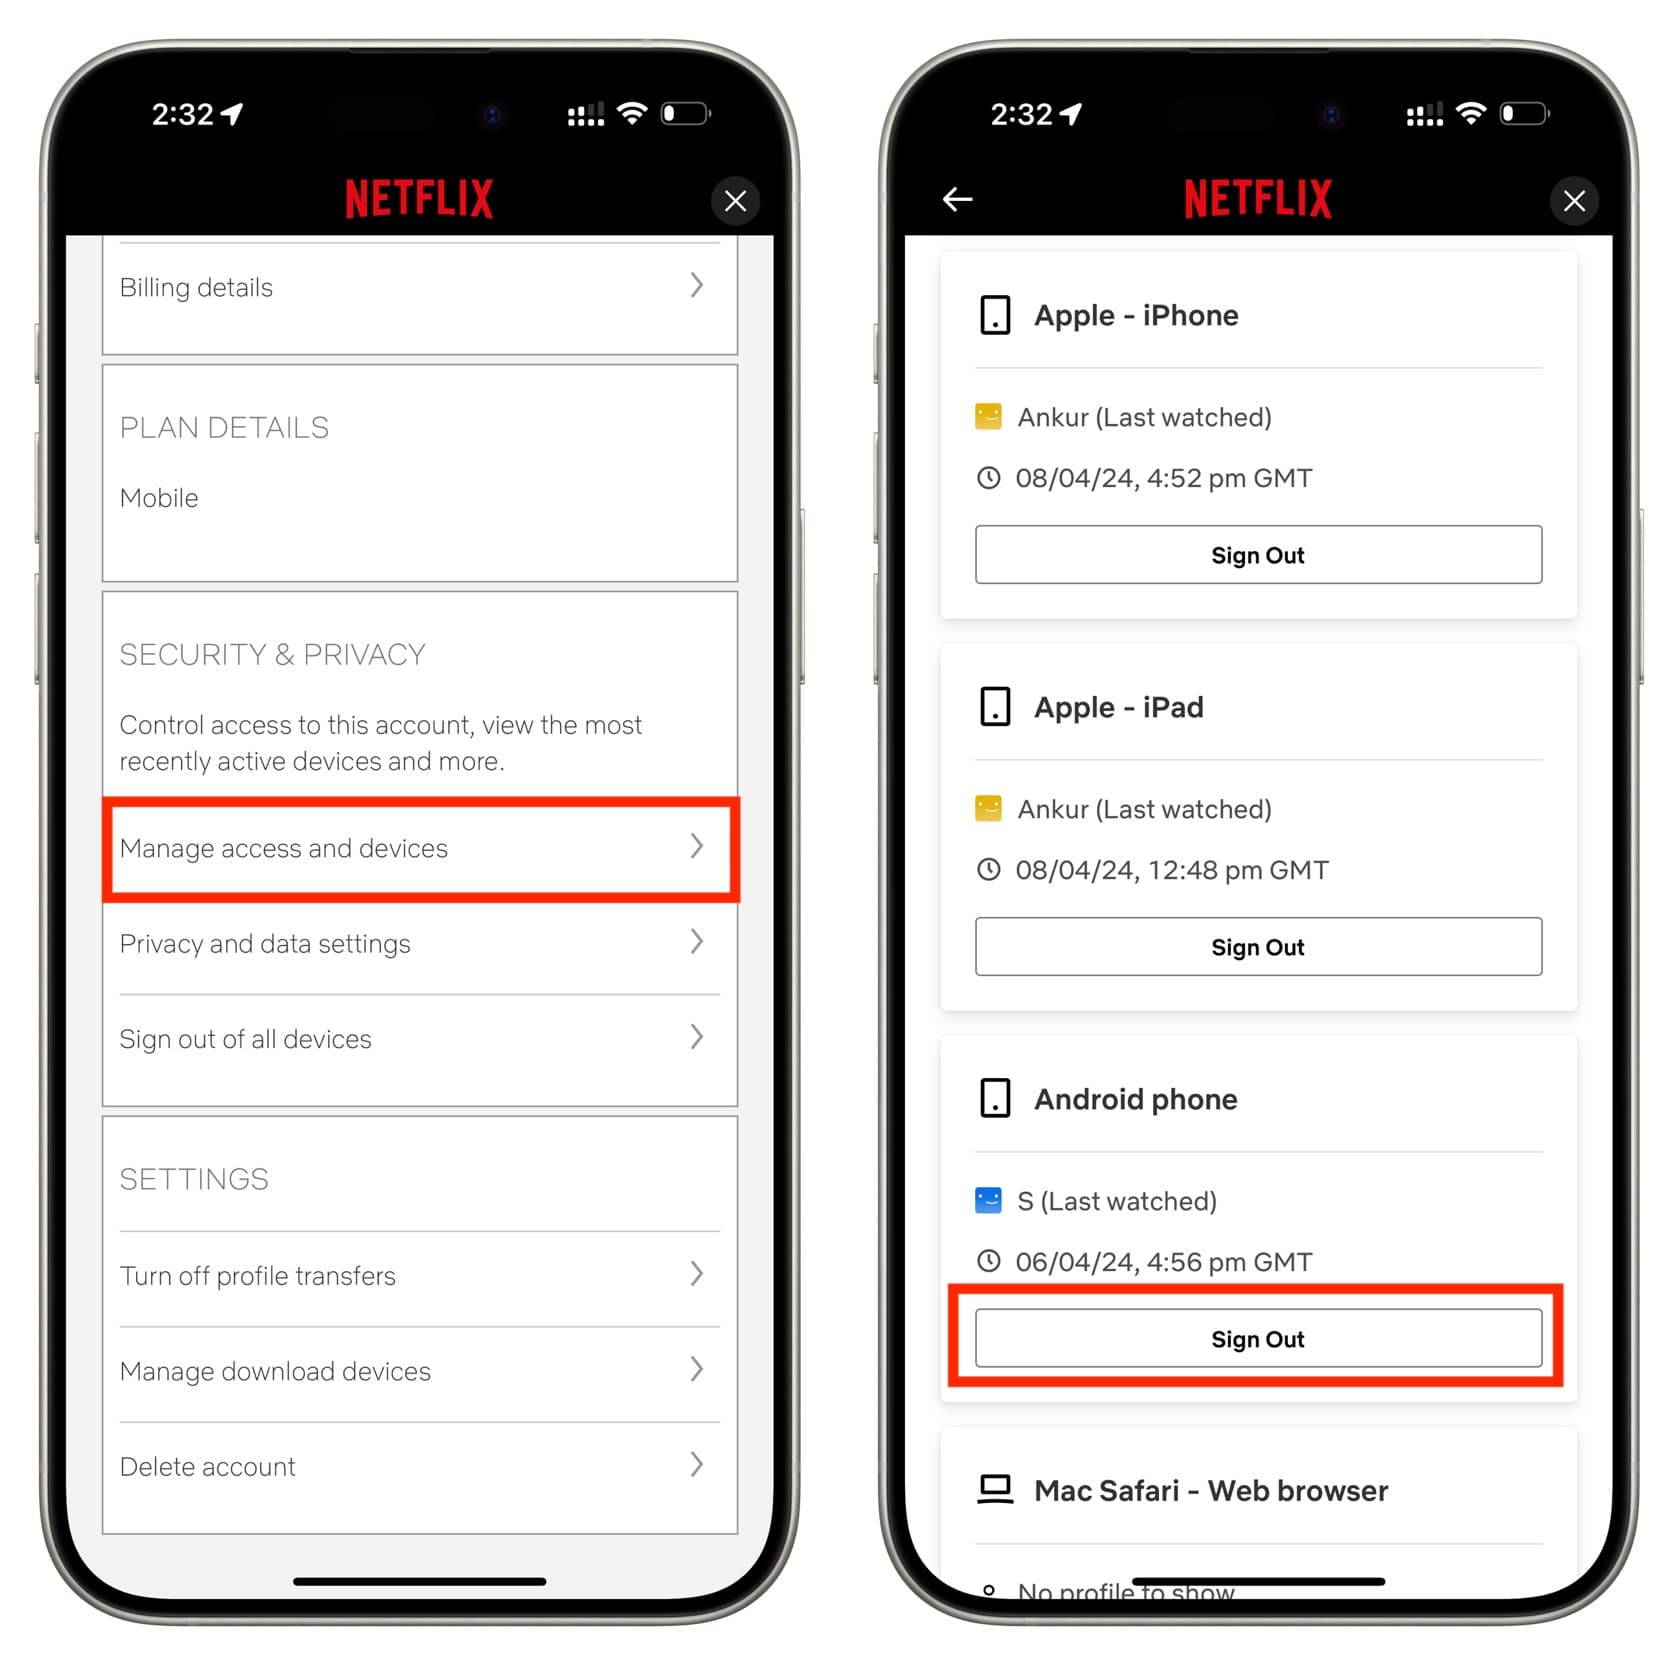 Manage access and devices on Netflix and sign out of devices you don't recognize